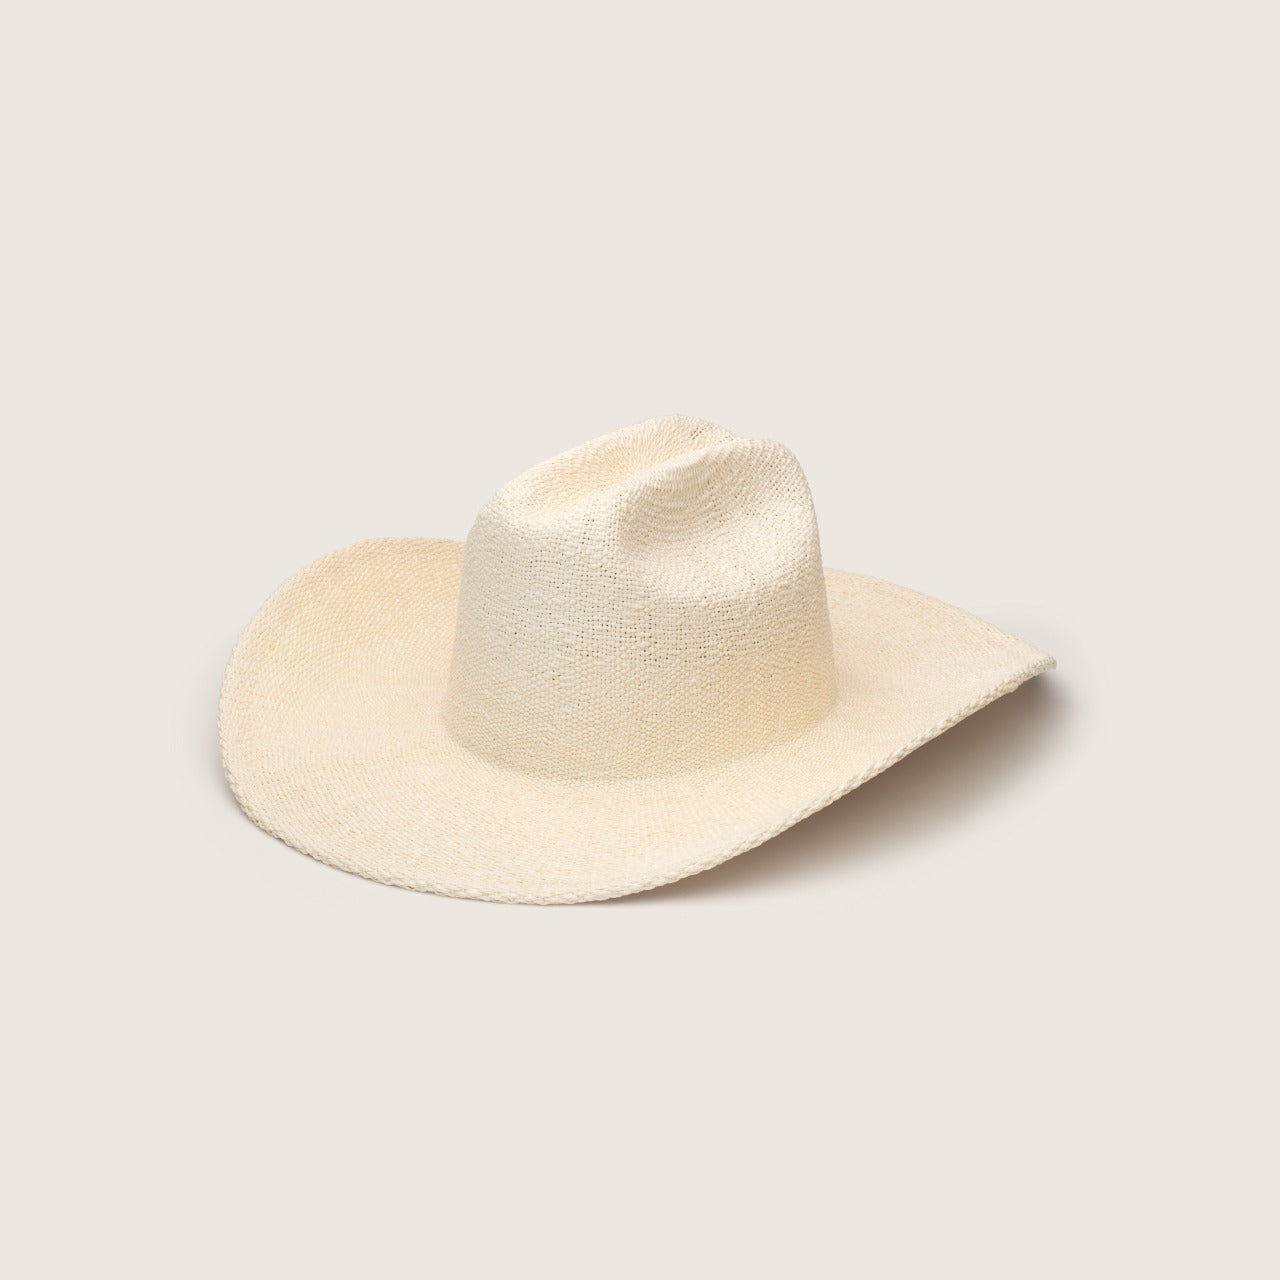 Front view of a straw cowboy hat